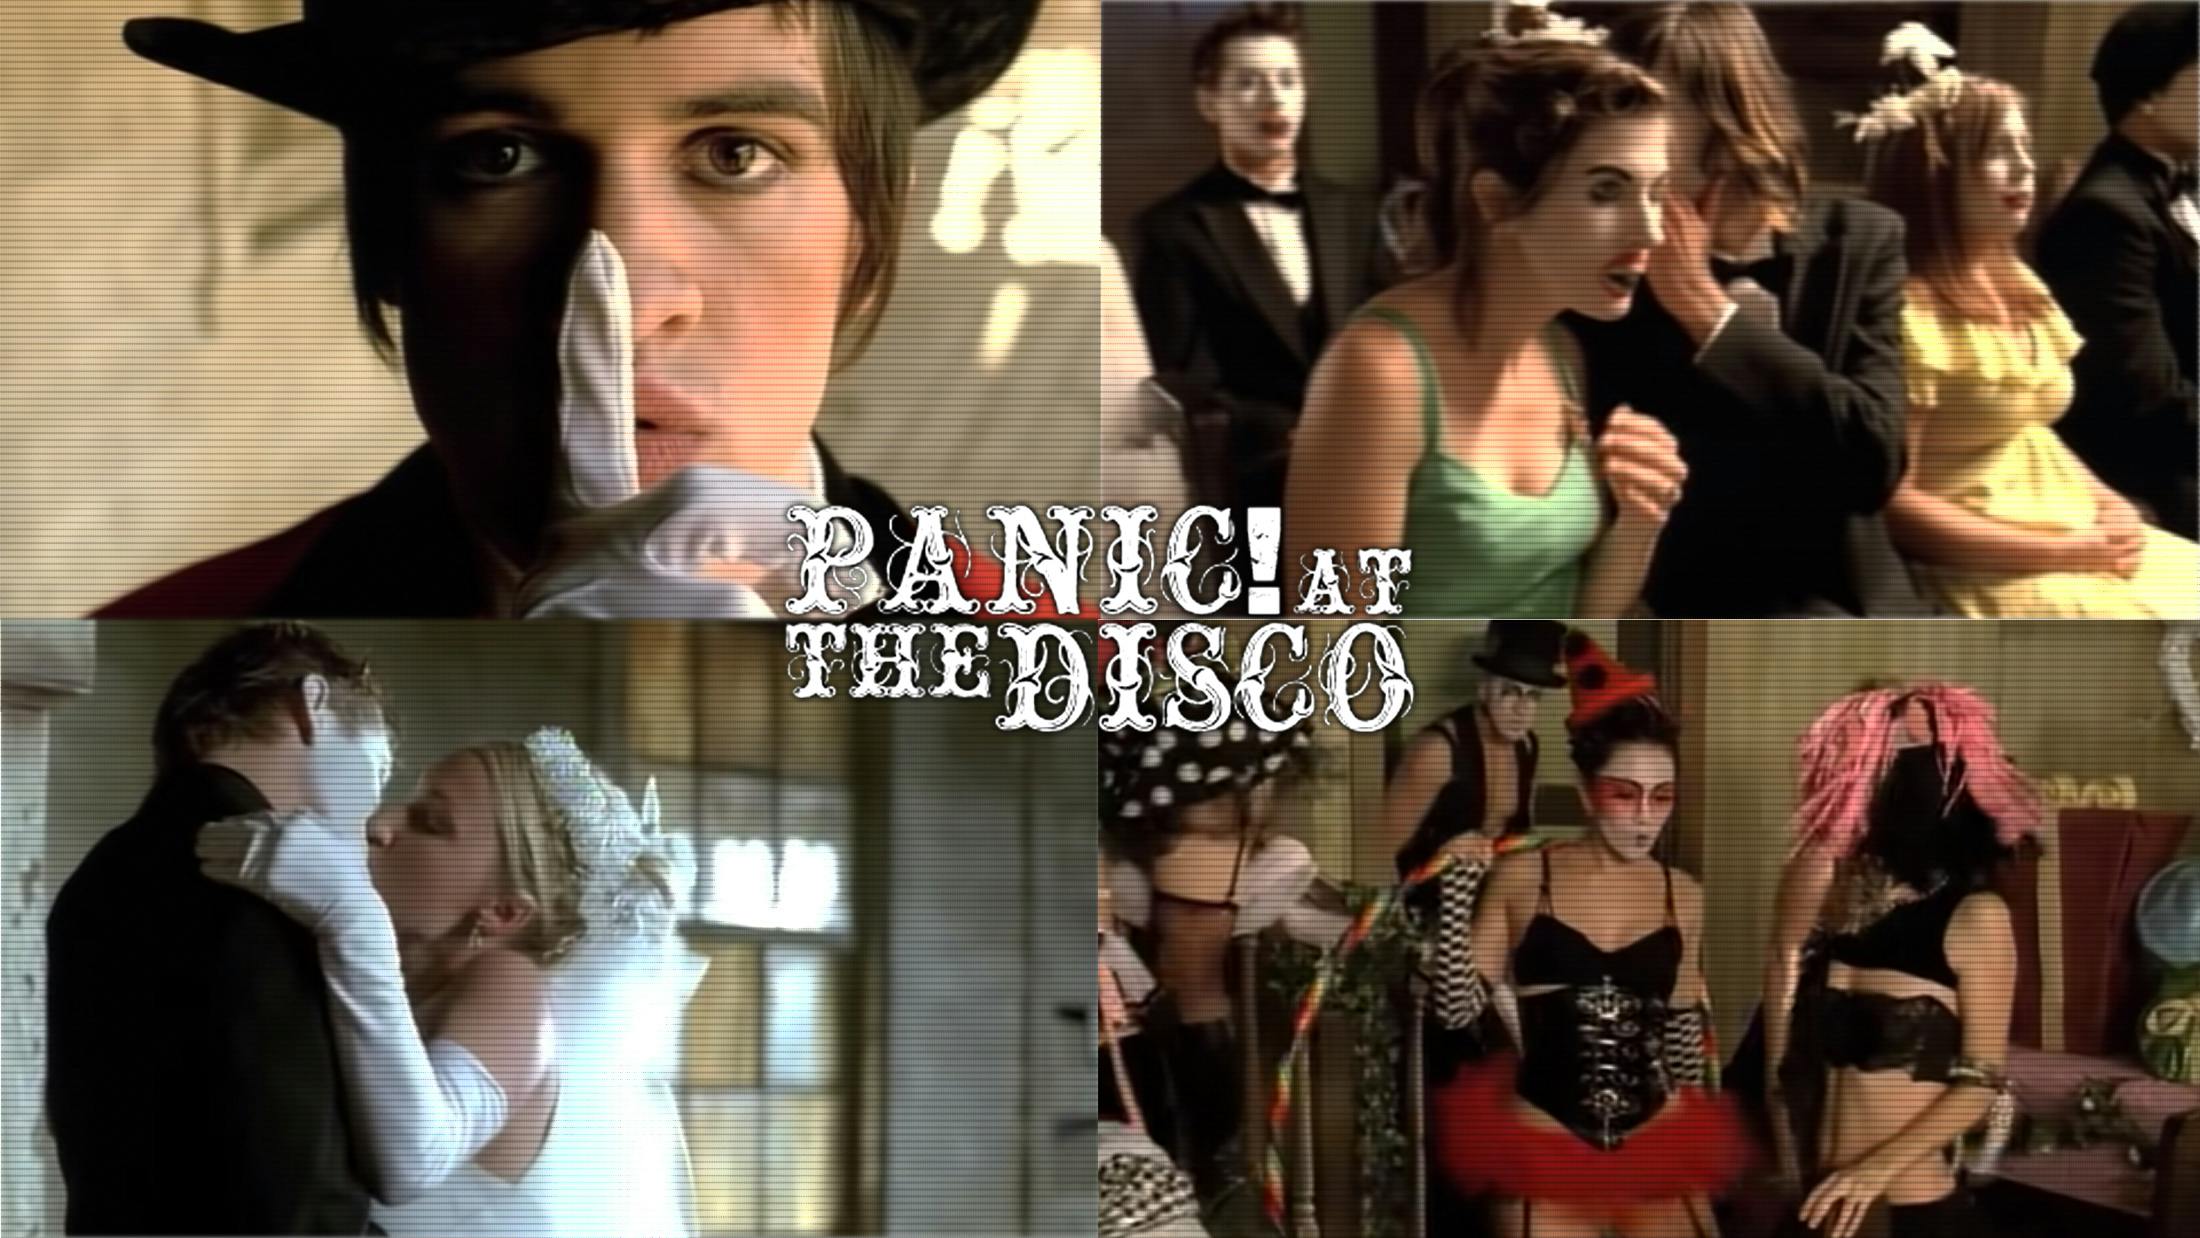 A Deep Dive Into Panic! At The Disco’s Video For I Write Sins, Not Tragedies